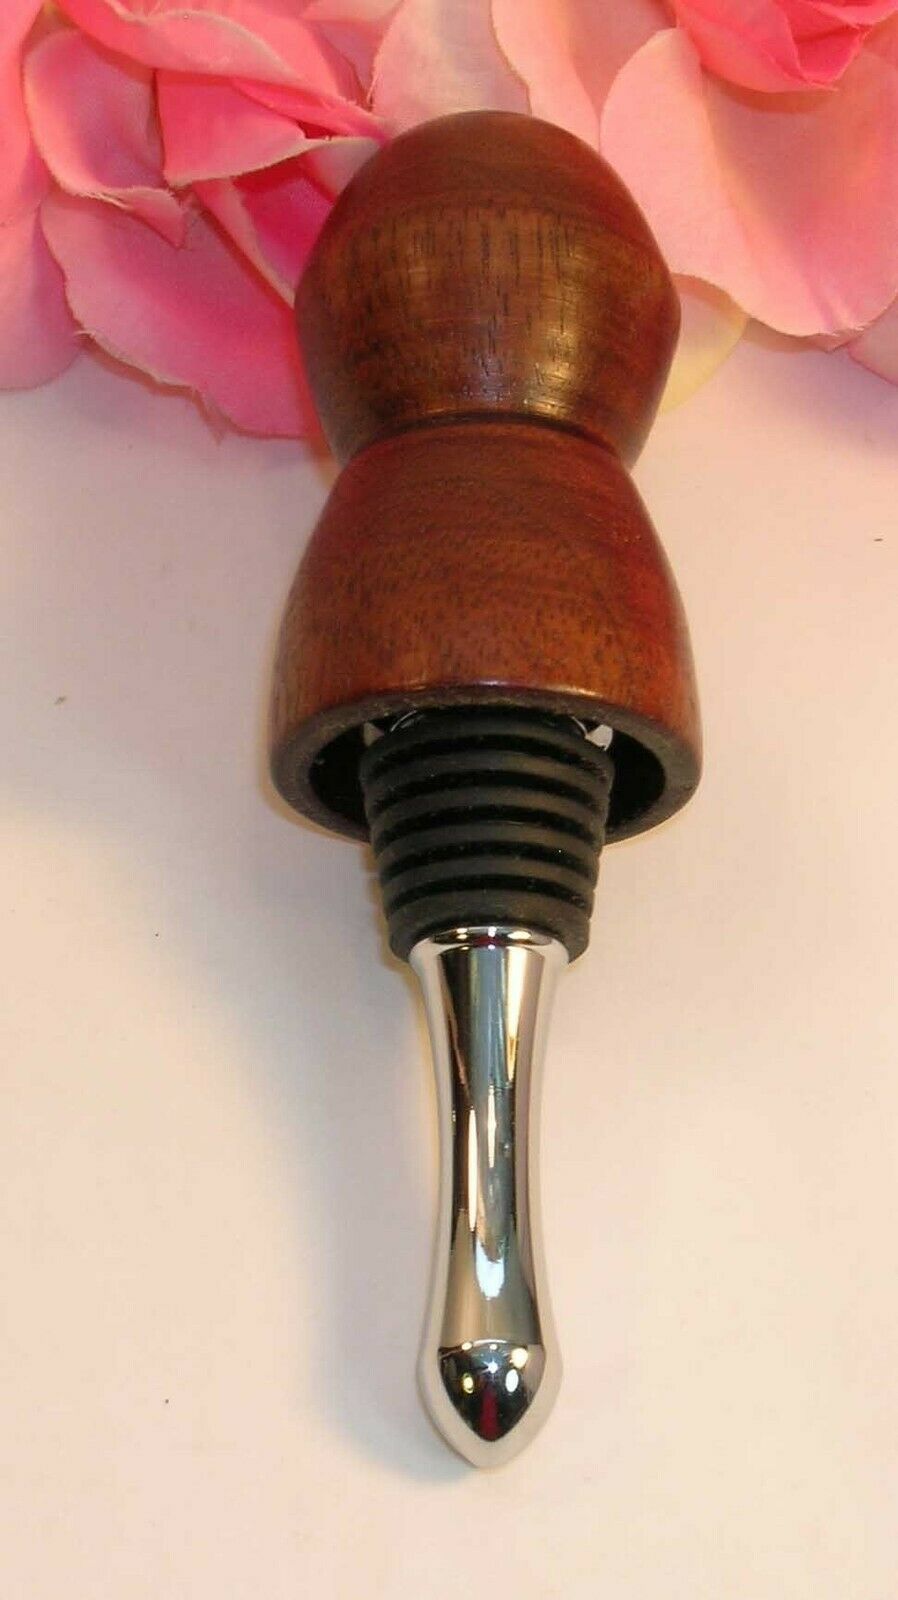 Primary image for New Hand Crafted / Turned Eastern Walnut Wood Wine Bottle Stopper Great Gift #2